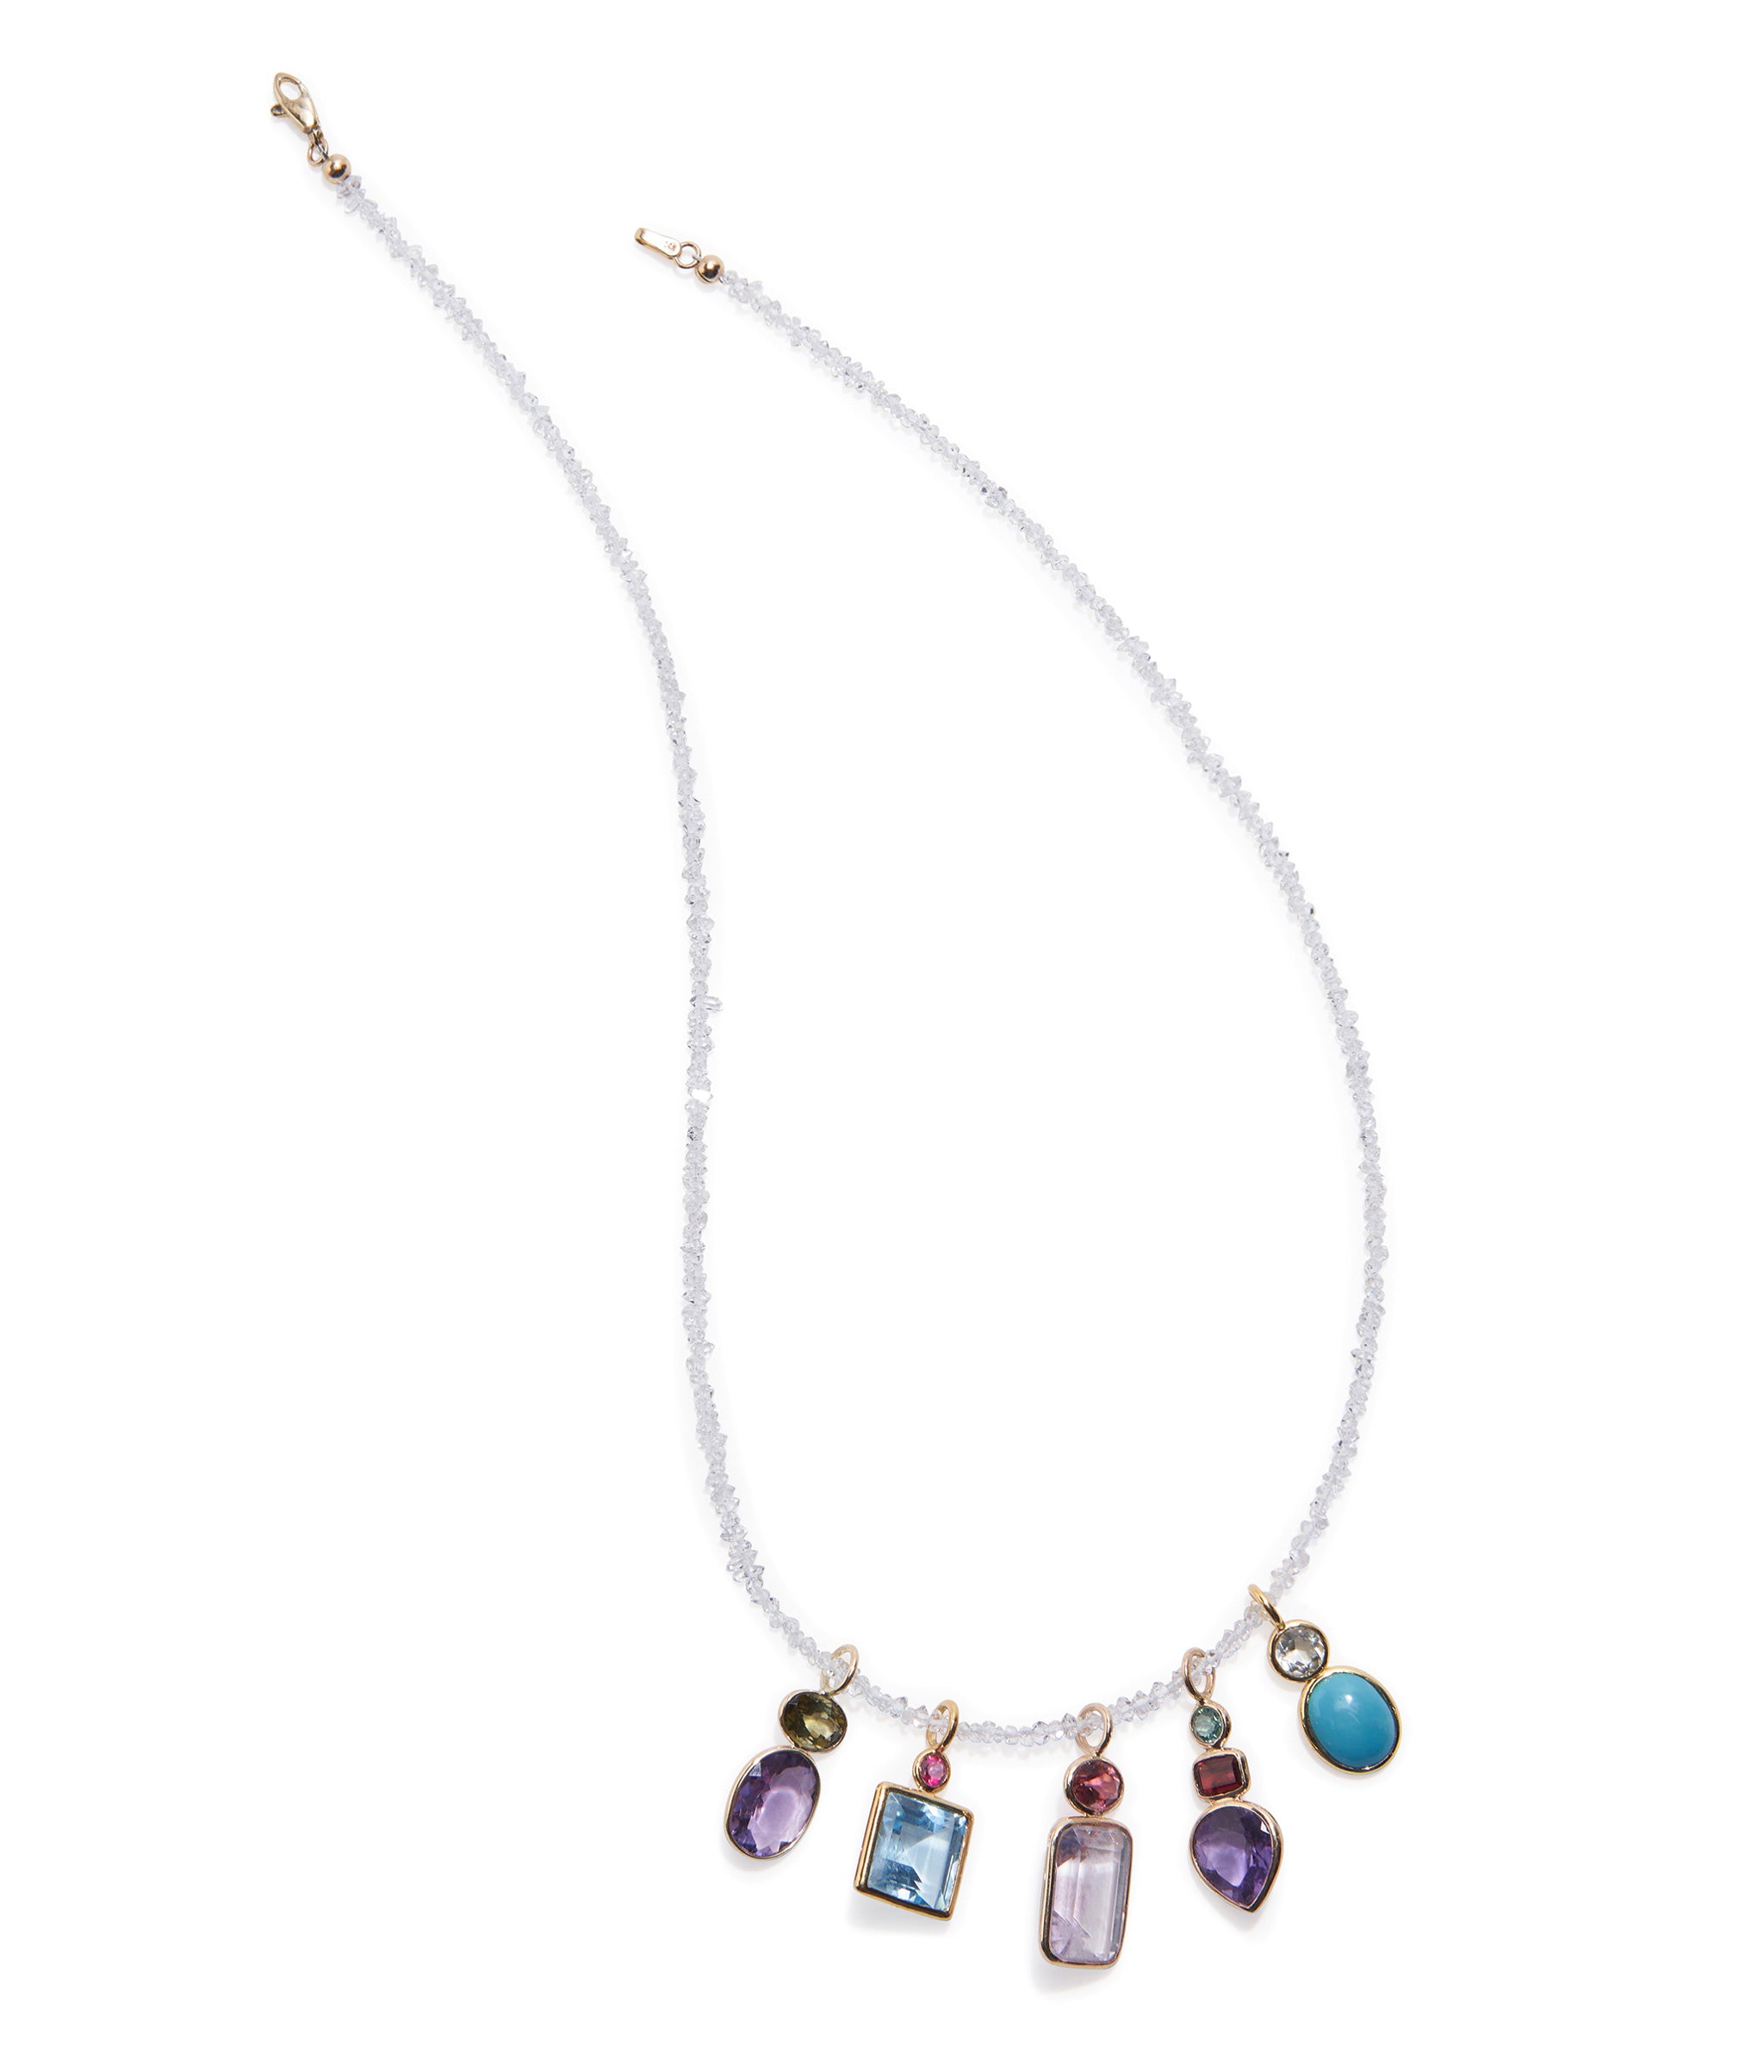 Tiny Beaded 14k Gold and Herkimer Diamond Quartz Necklace with with assorted colorful semiprecious charms